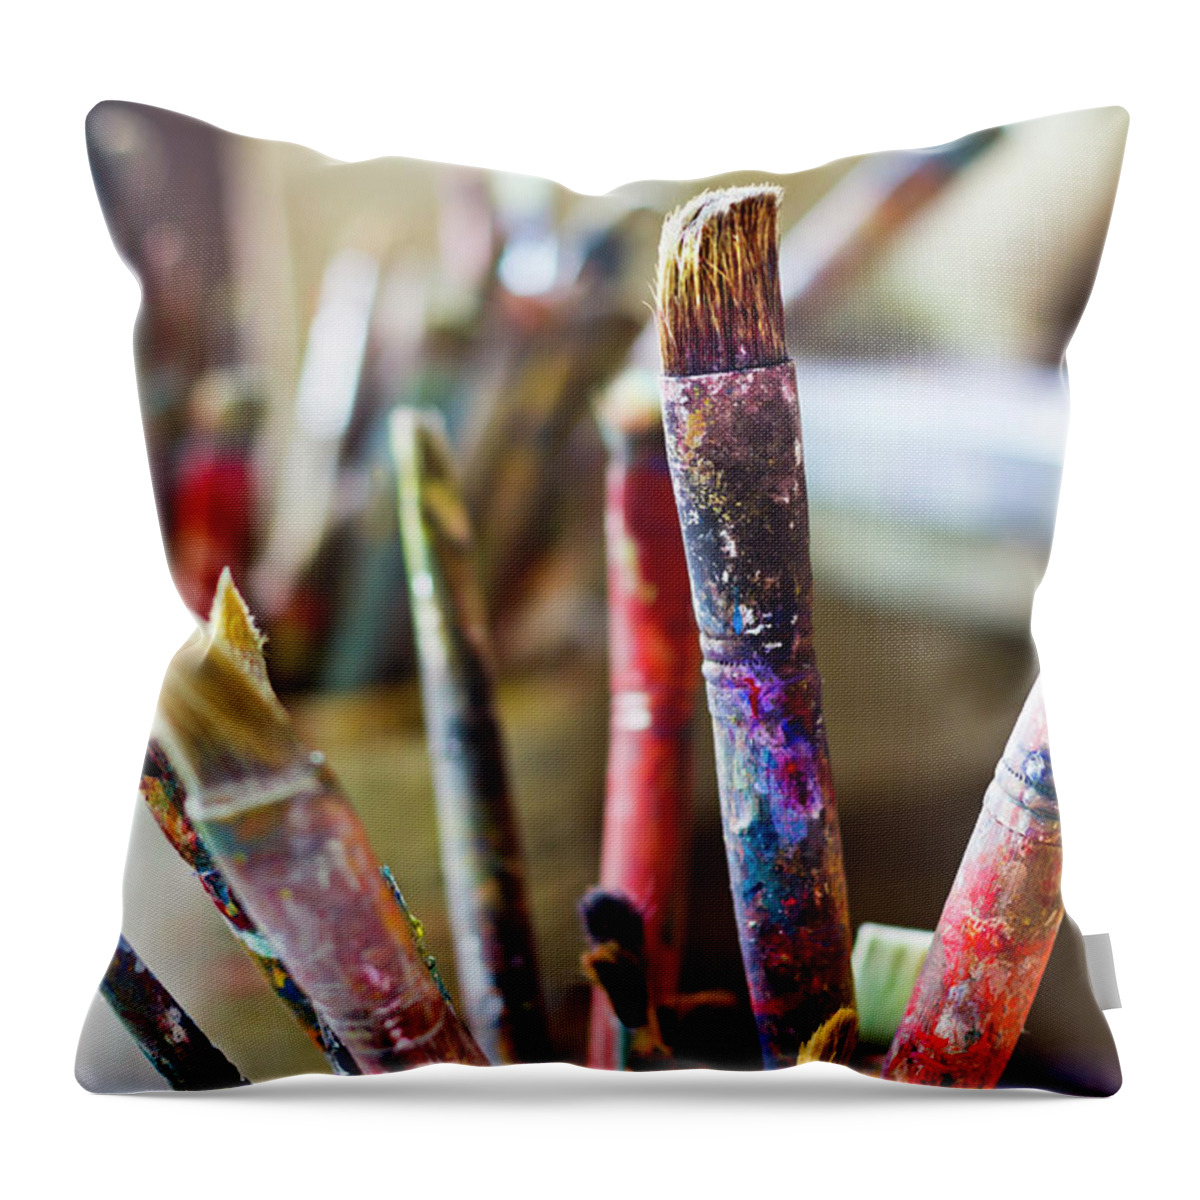 Close-up Throw Pillow featuring the photograph Painters Brushes by Picturegarden